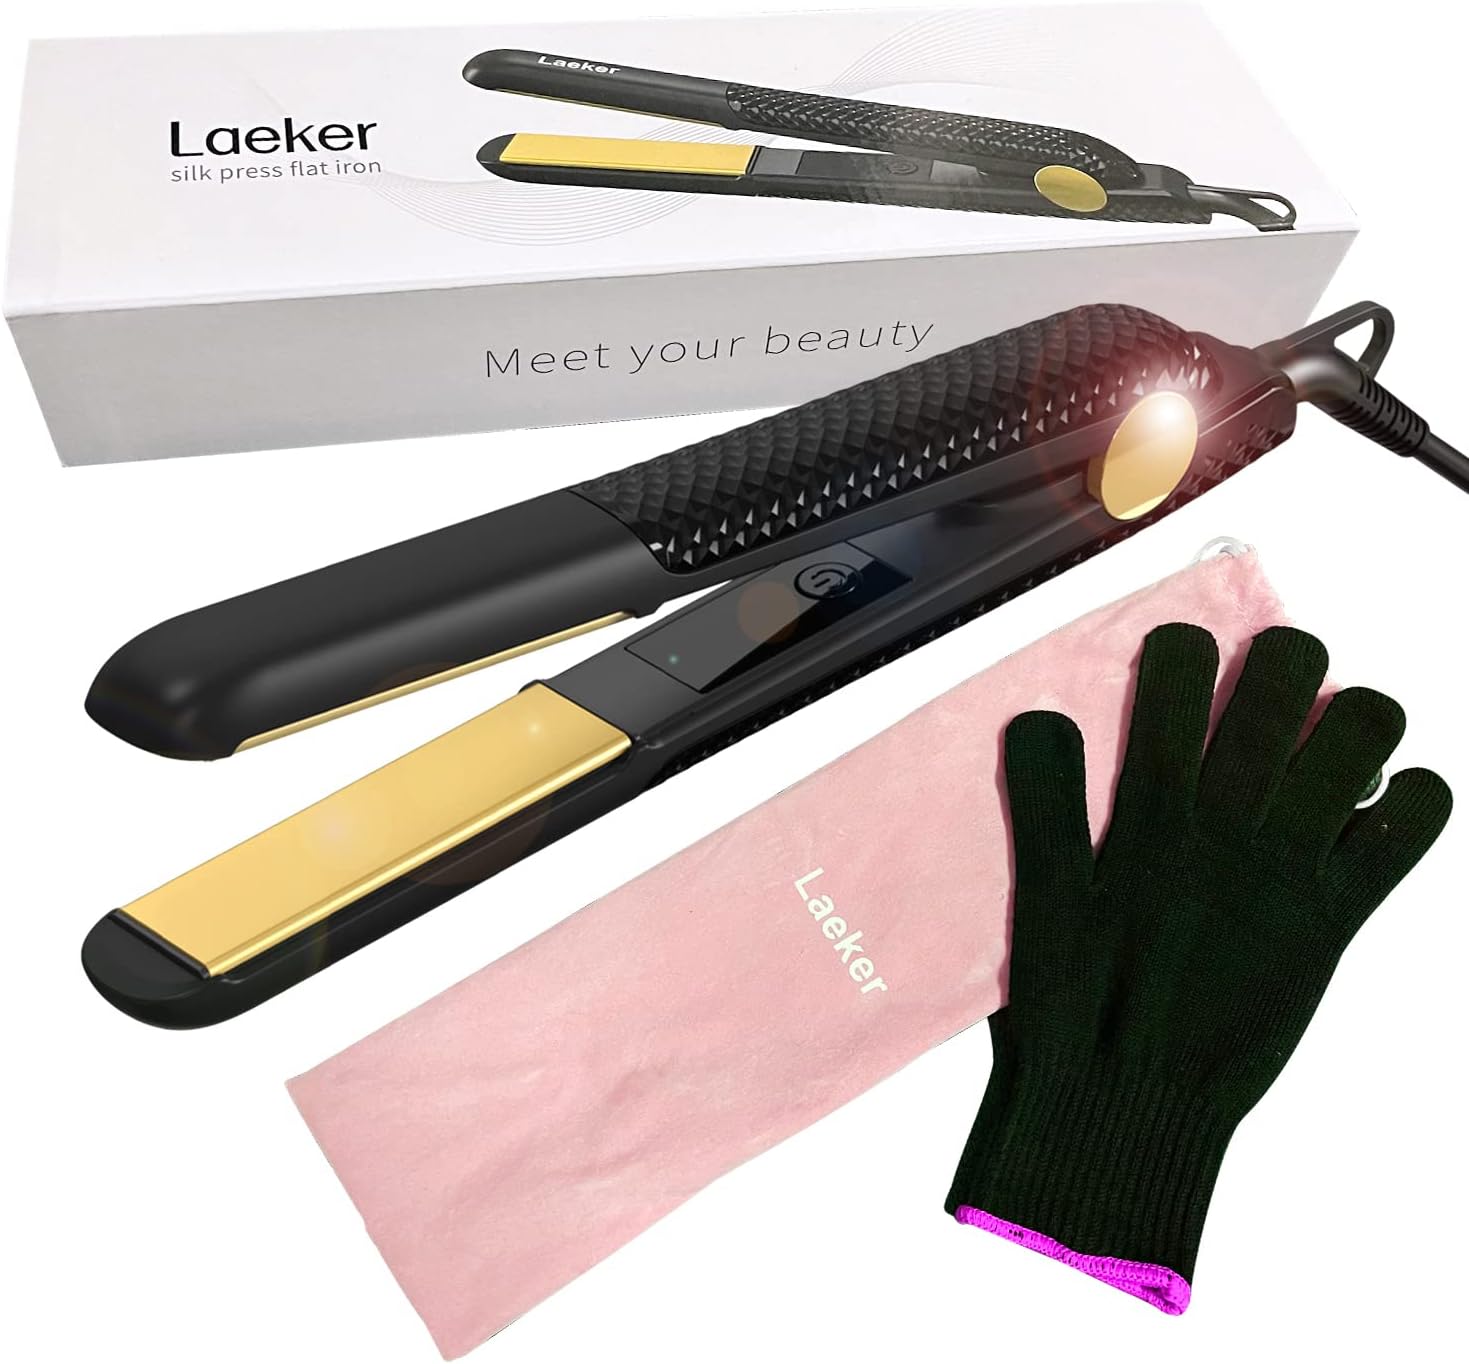 Laeker Flat Iron for Black Women Hair, Silk Press Hair Straightener with Keratin & Argan Oil Infused Ceramic Tourmaline Ionic Plates, 460℉ Straightener & Curler 2 in 1 for African American,Thick Hair